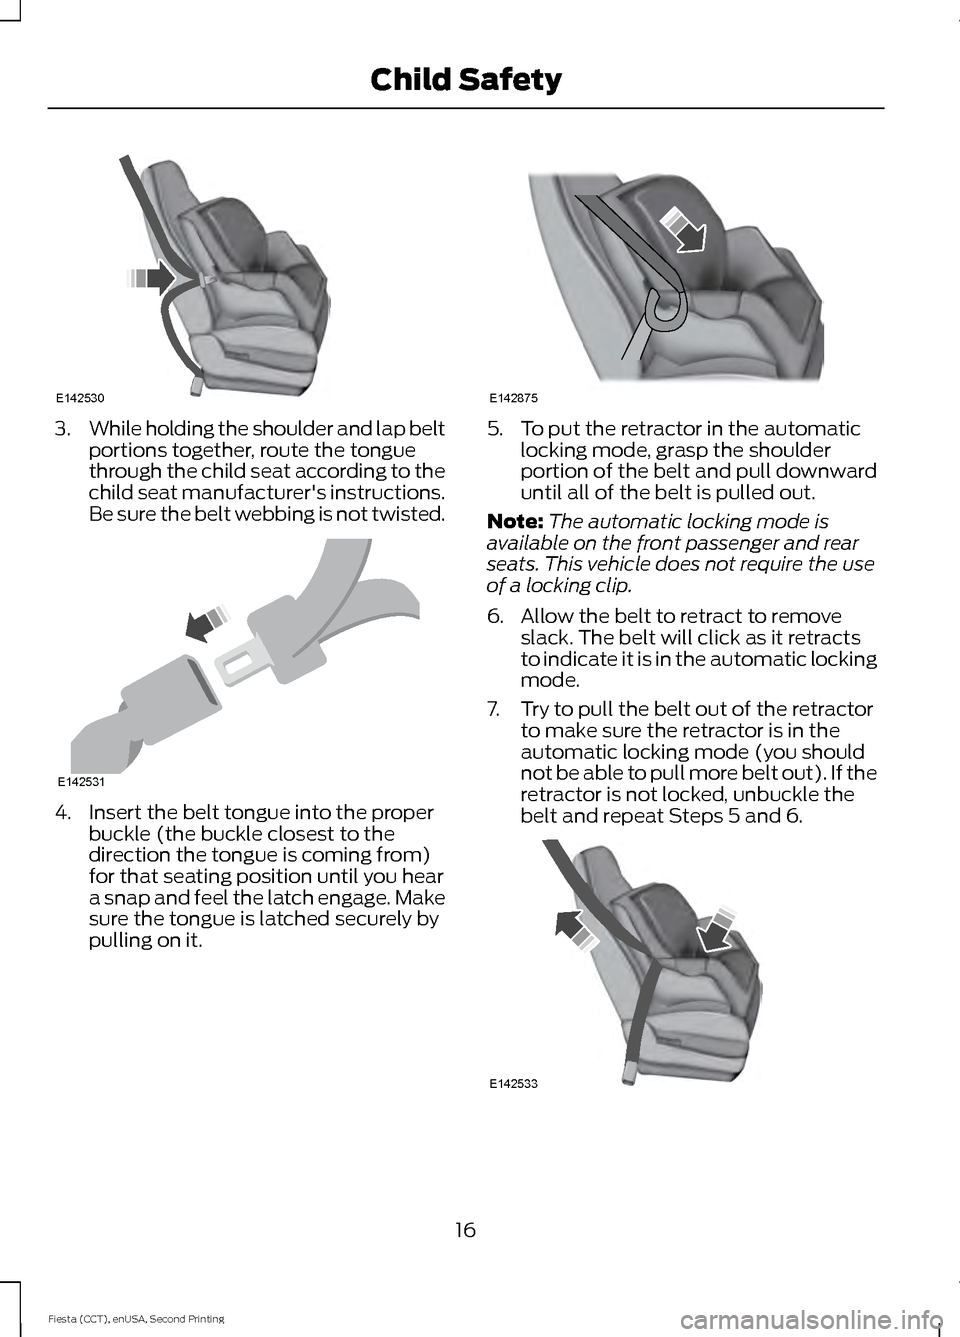 FORD FIESTA 2015 6.G User Guide 3.
While holding the shoulder and lap belt
portions together, route the tongue
through the child seat according to the
child seat manufacturers instructions.
Be sure the belt webbing is not twisted. 